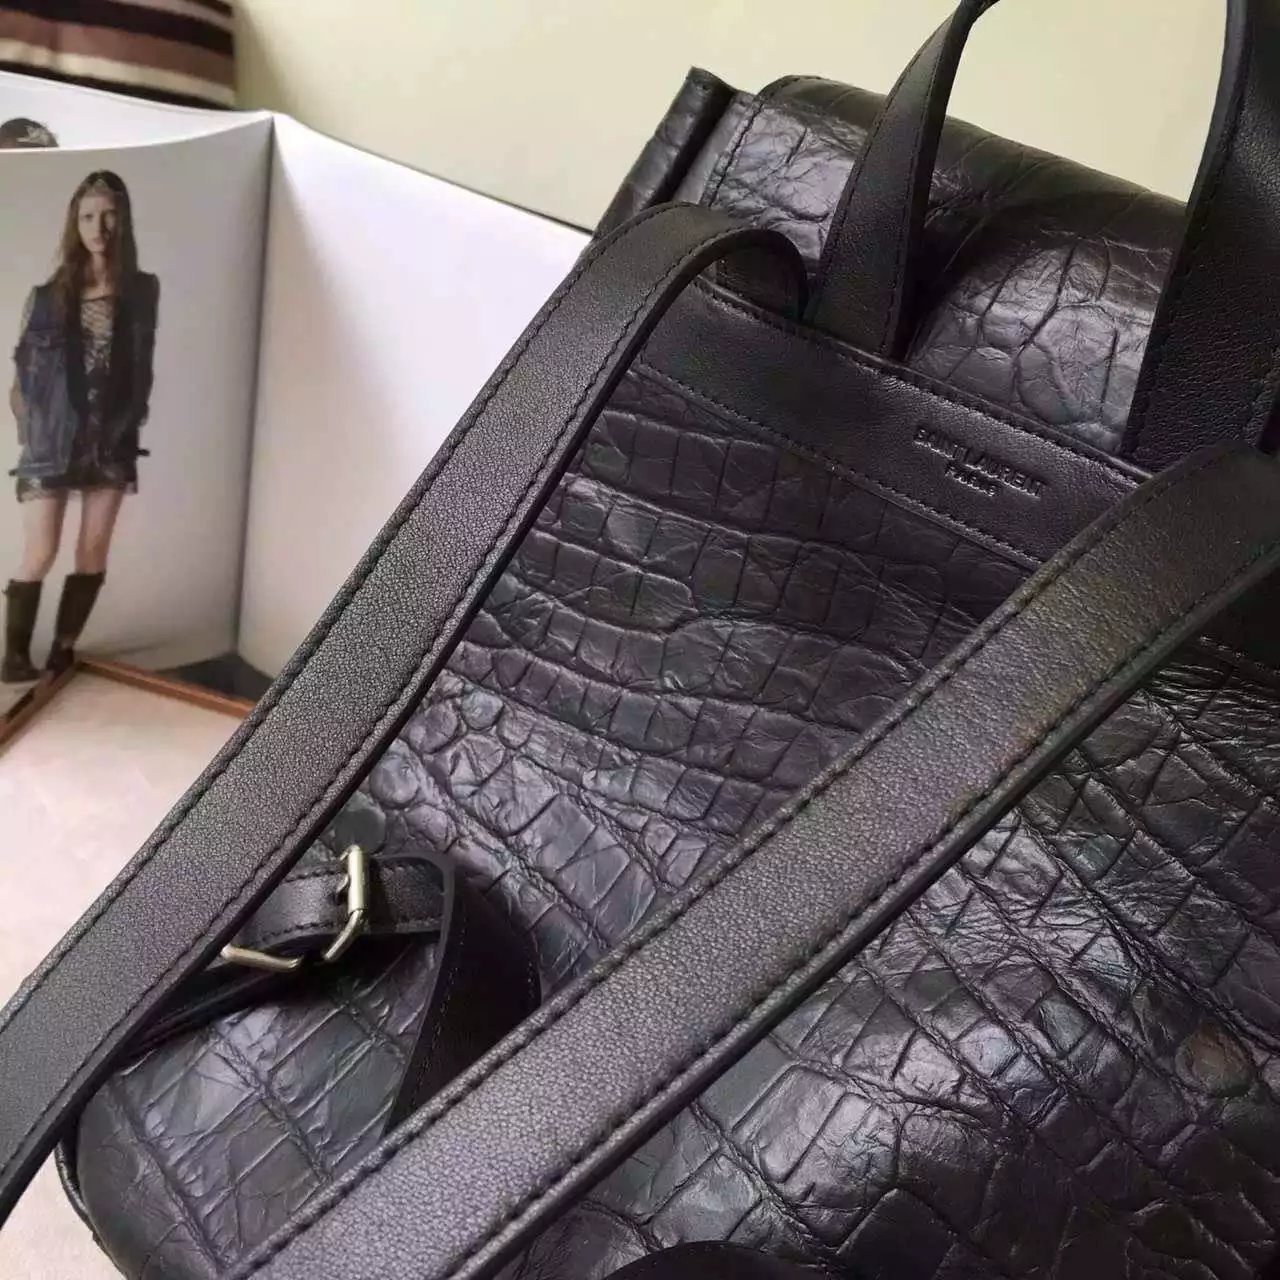 2016 New Saint Laurent Bag Cheap Sale-Saint Laurent Large Shopping Tote Bag in Black Crocodile Embossed Leather - Click Image to Close